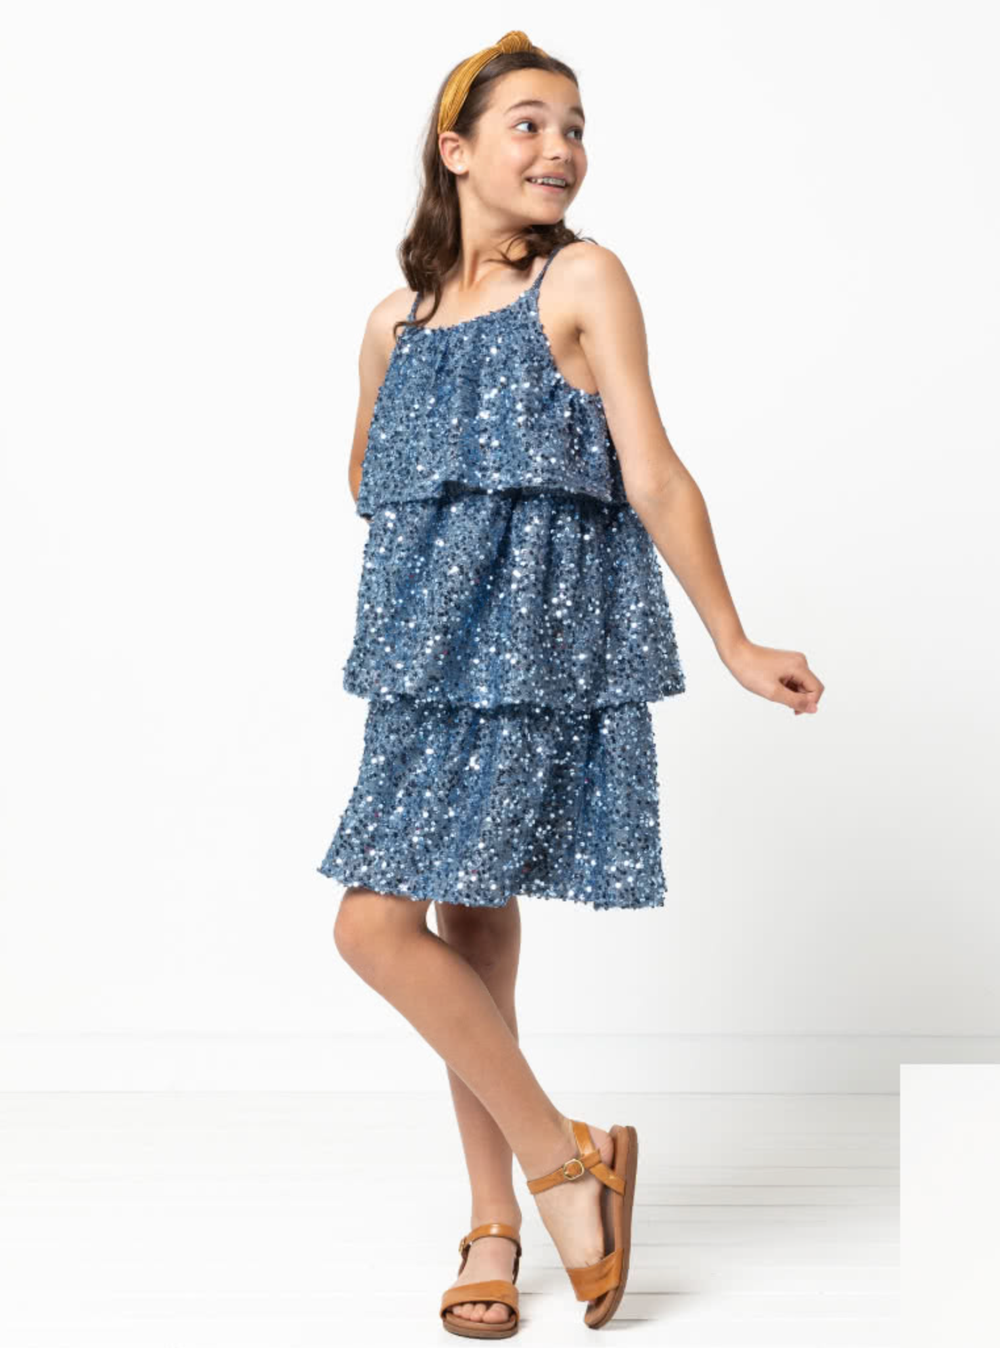 Child wearing the Child/Teen Wilma Dress sewing pattern from Style Arc on The Fold Line. A sleeveless dress pattern made in cotton, rayon, silk or linen fabrics, featuring a pull-on style, three tiers, spaghetti straps, and elastic at the underarms and ba